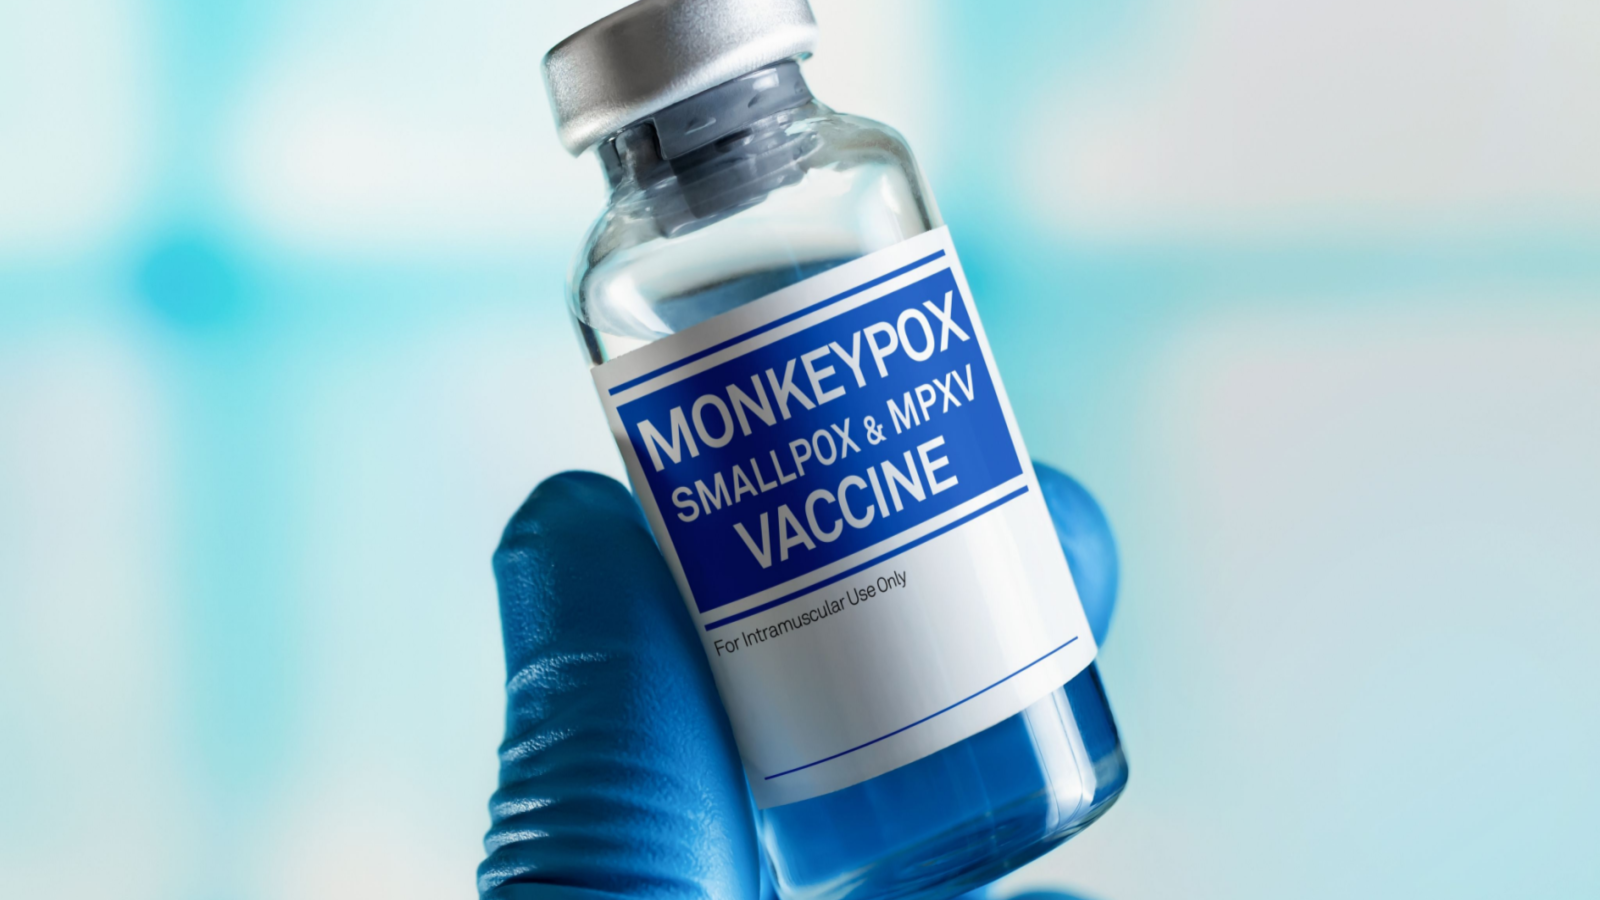 Vaccination for booster shot for Smallpox and Monkeypox (BVNRY Stock). Doctor with vial of the doses vaccine for Monkeypox (MPXV) disease. Geovax (GOVX) has a monkeypox vaccine.